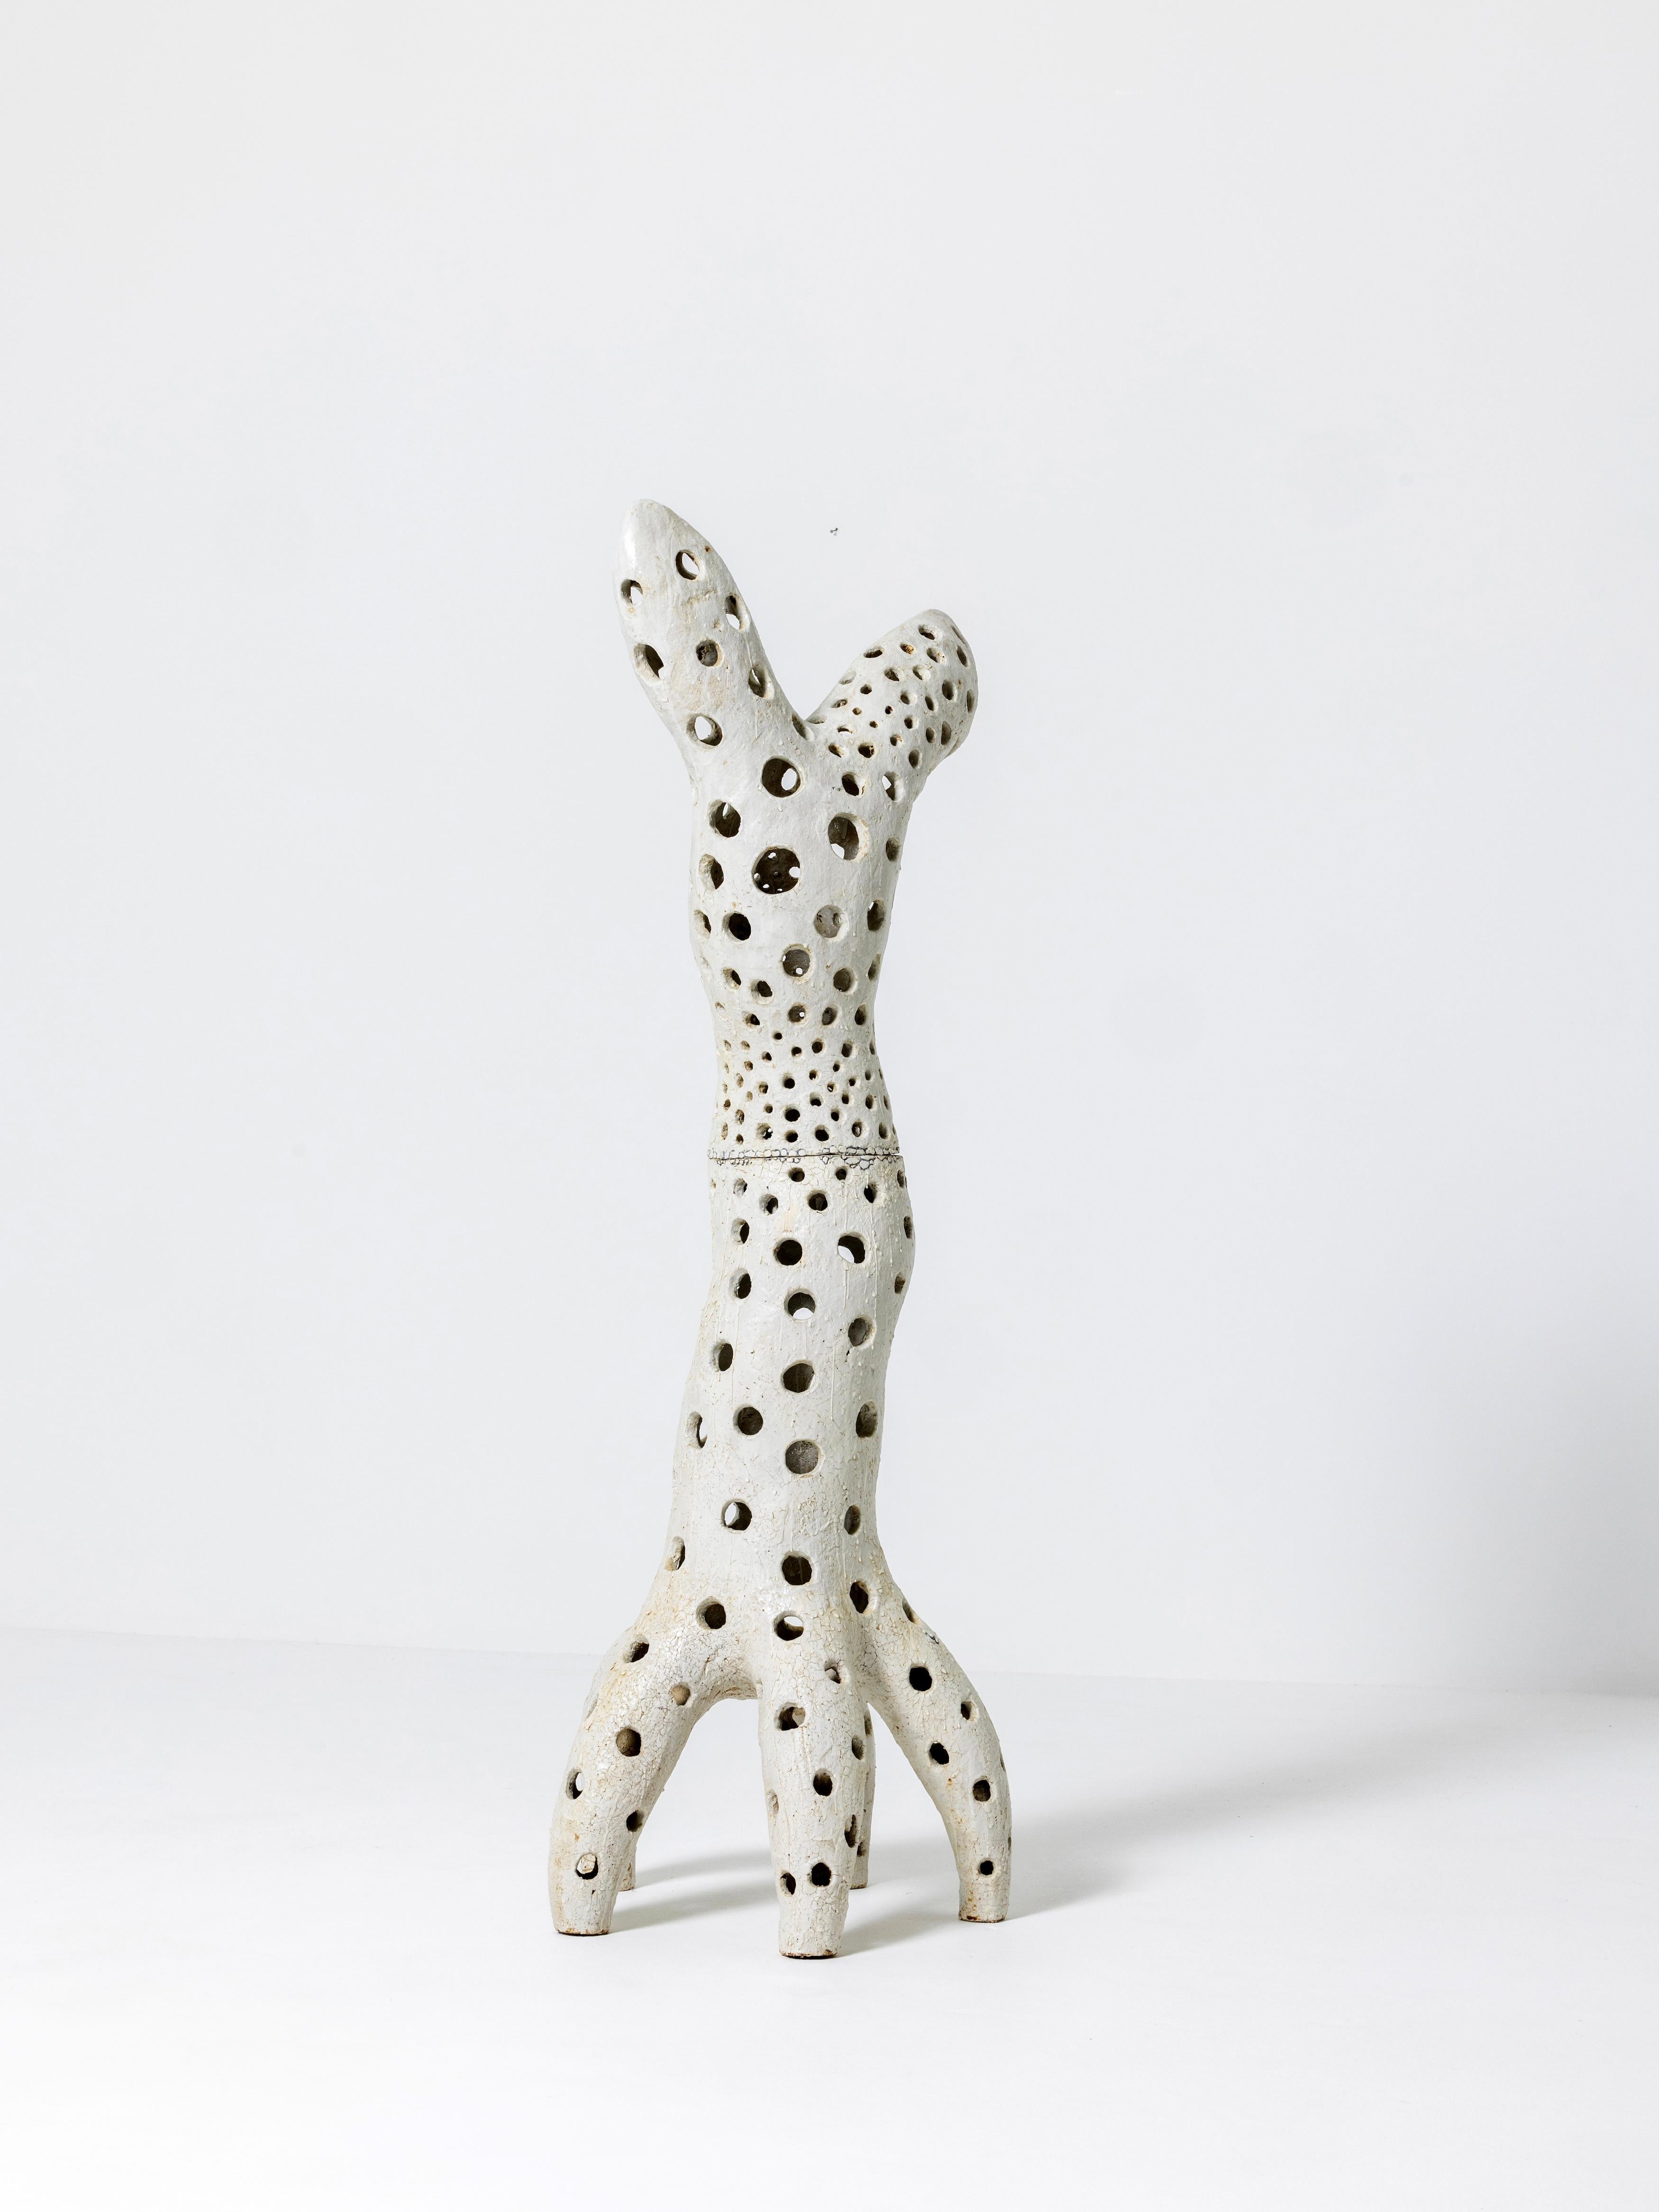 French Contemporary Ceramic Sculpture 